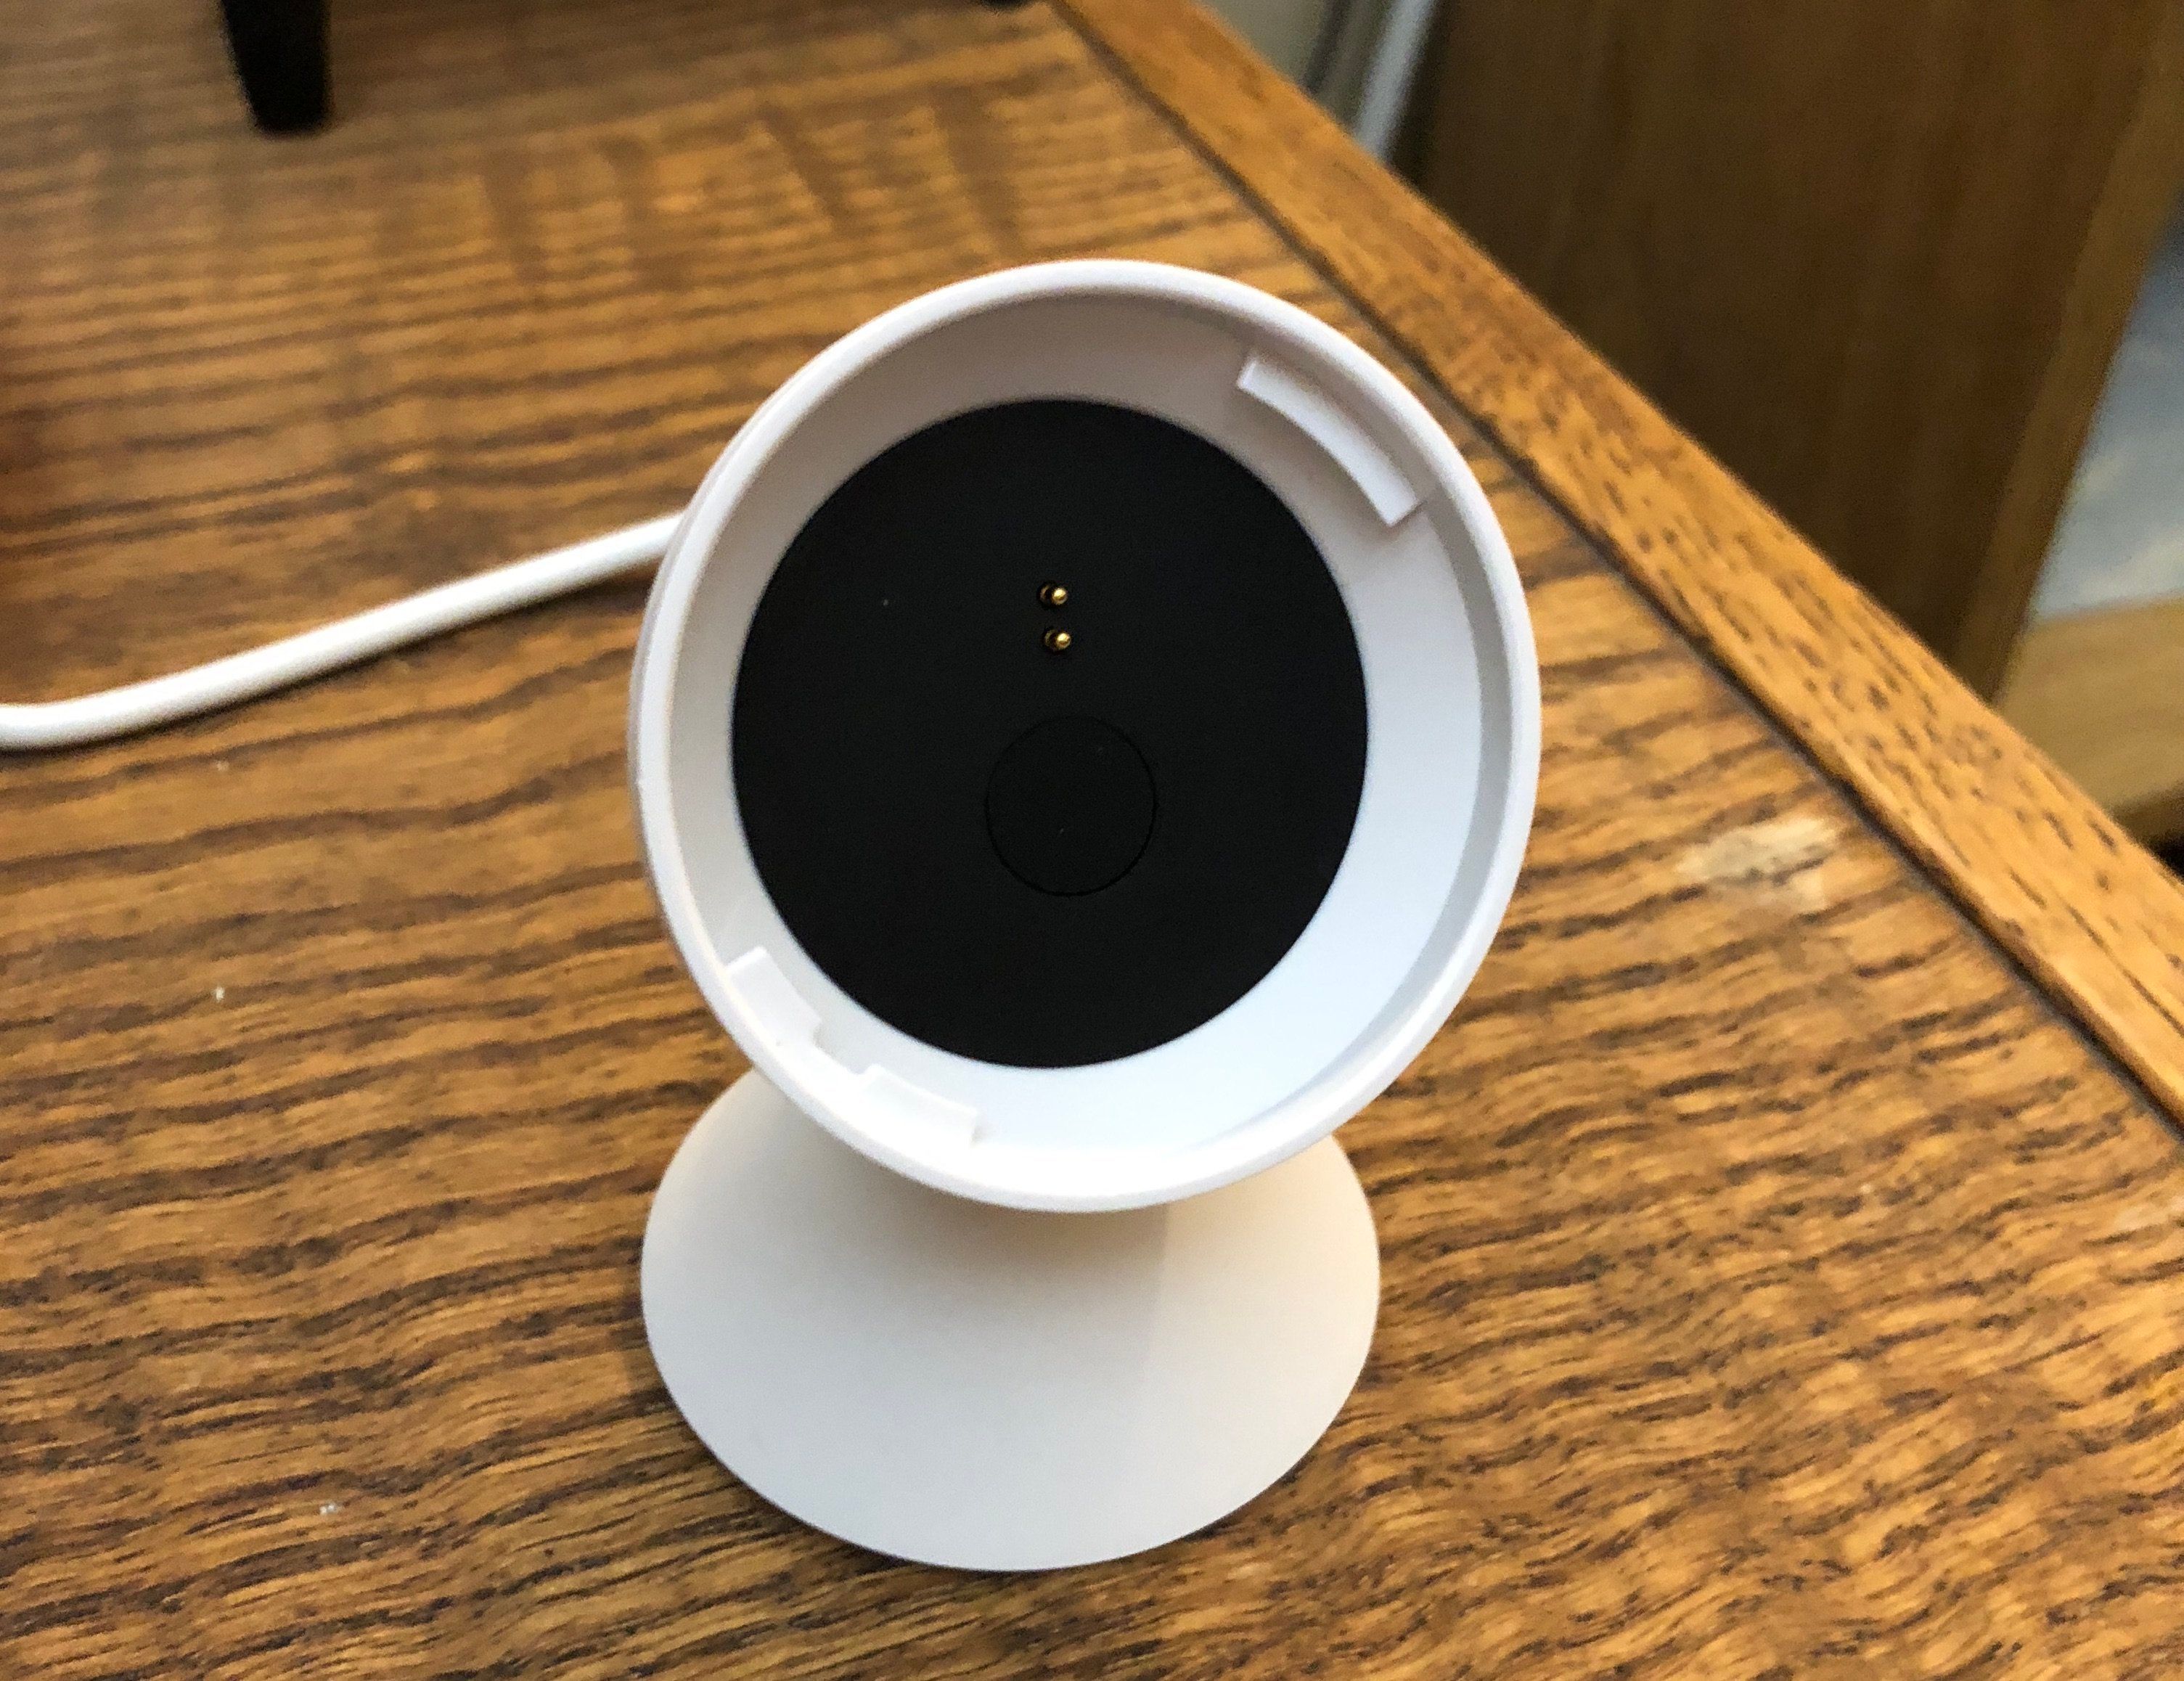 Review: Logitech Circle 2 Wi-Fi camera is a reliable -